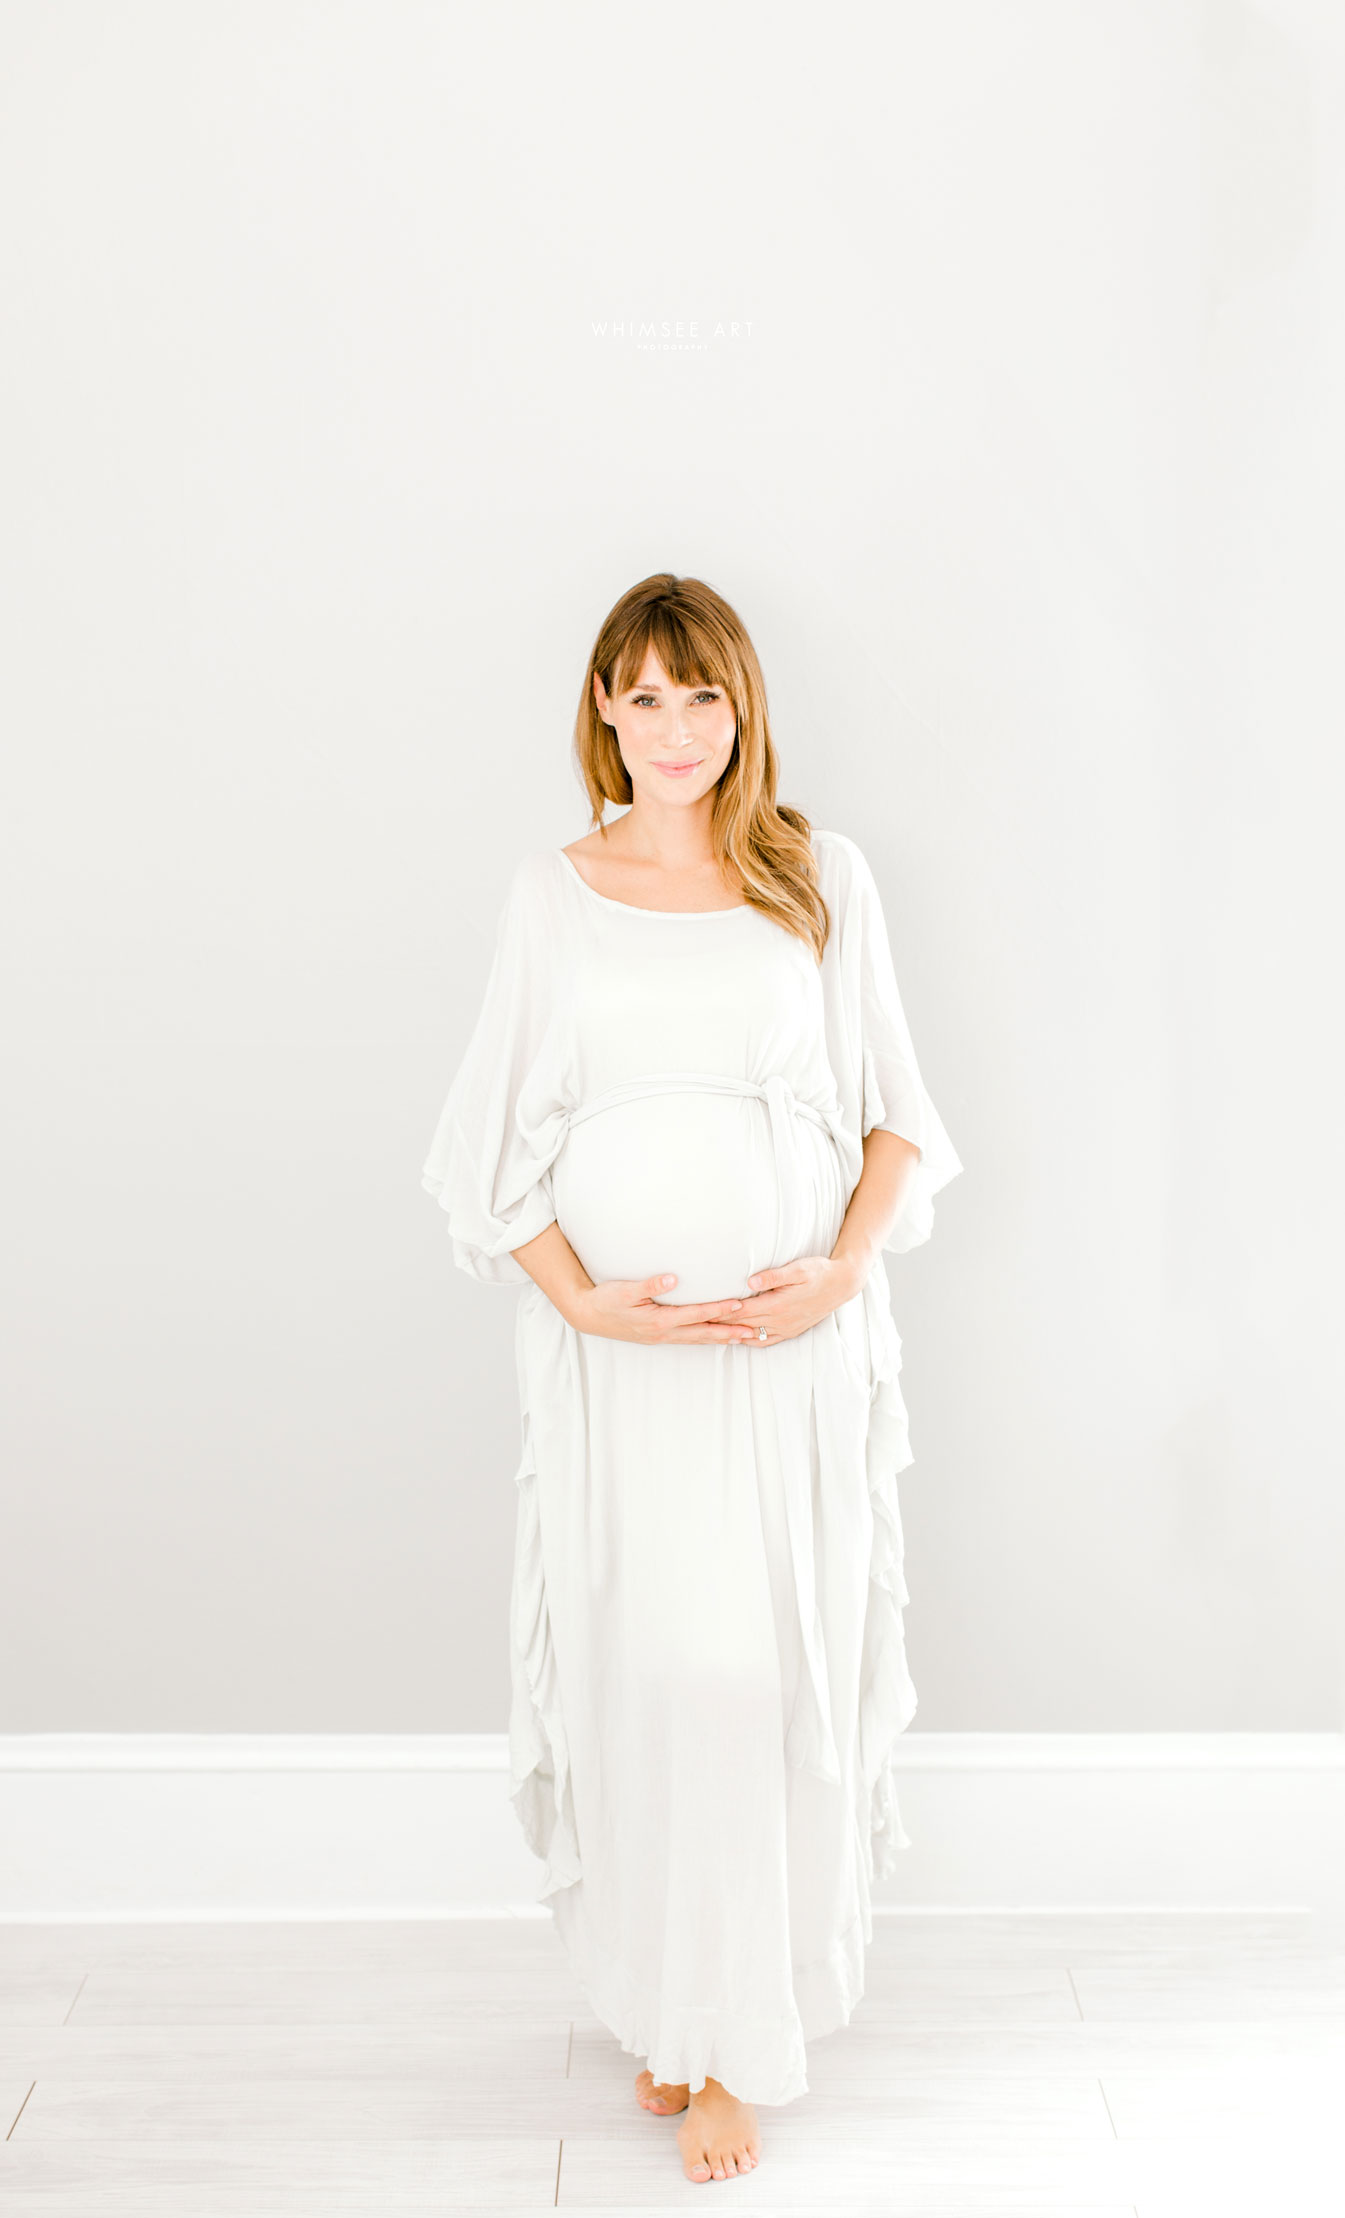 Bright and Airy Studio Maternity Session | Roanoke Baby Photographer | Whimsee Art Photographer